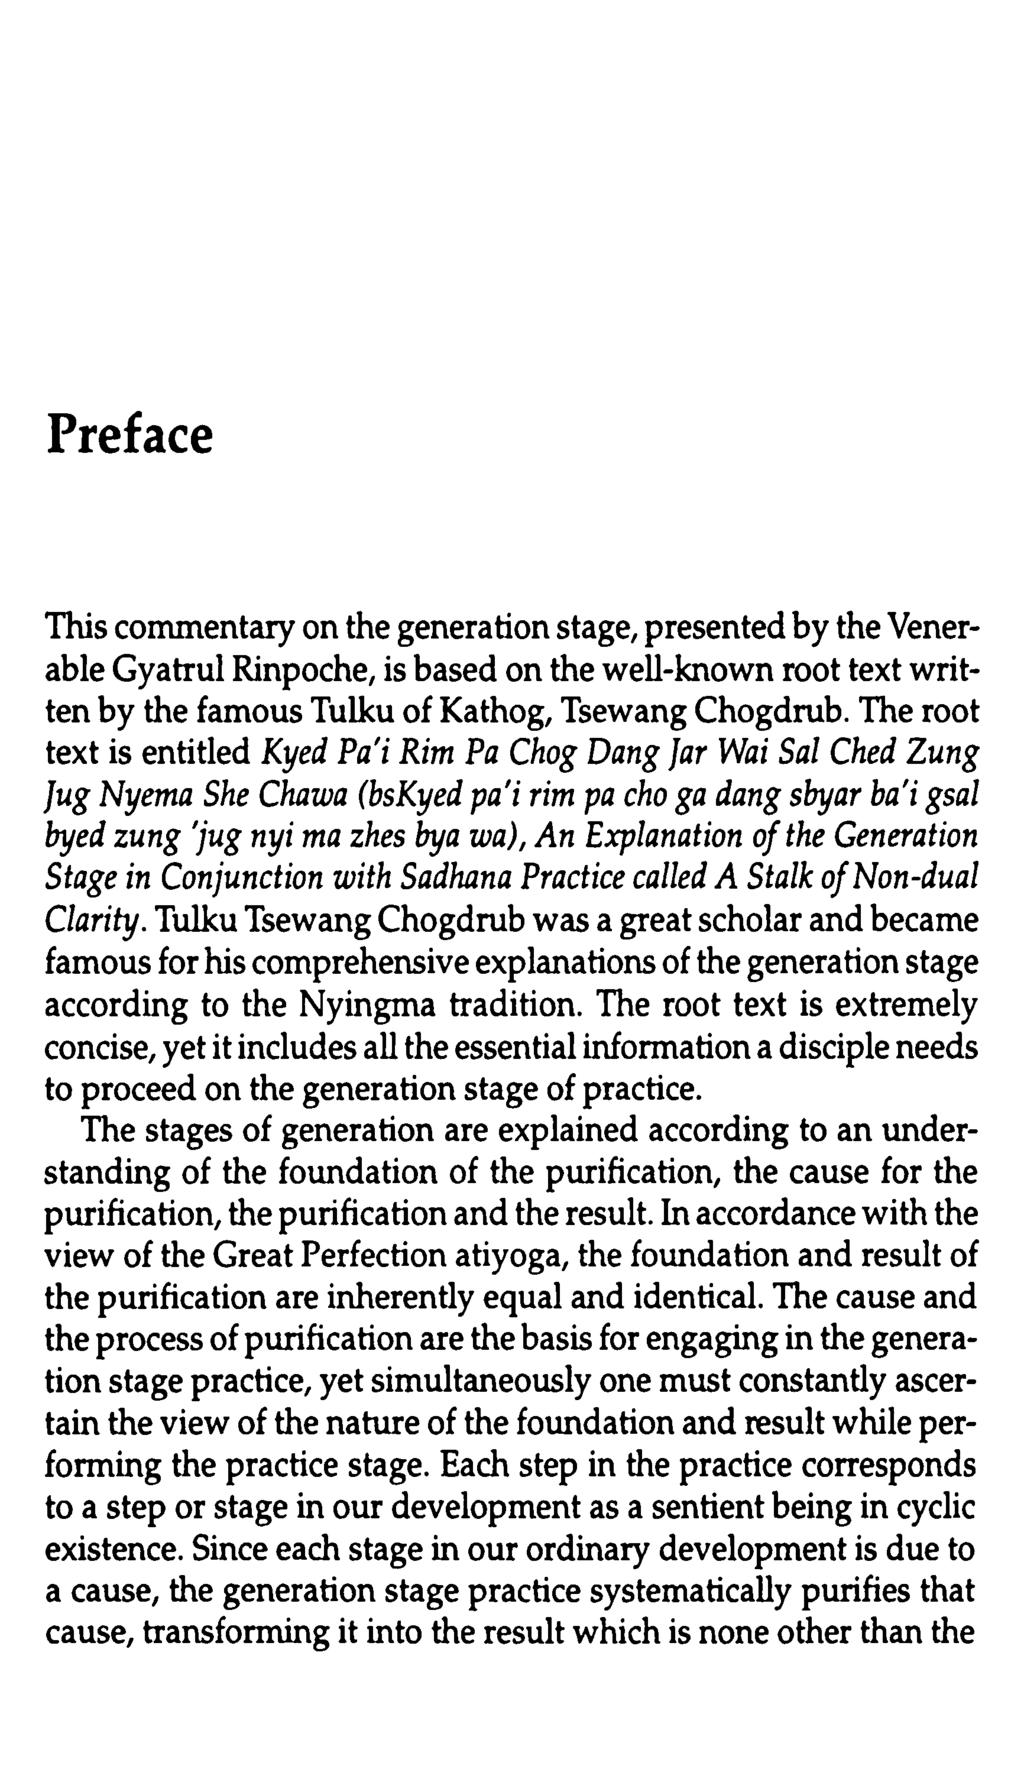 Preface This commentary on the generation stage, presented by the Venerable Gyatrul Rinpoche, is based on the well-known root text written by the famous Tulku of Kathog, Tsewang Chogdrub.